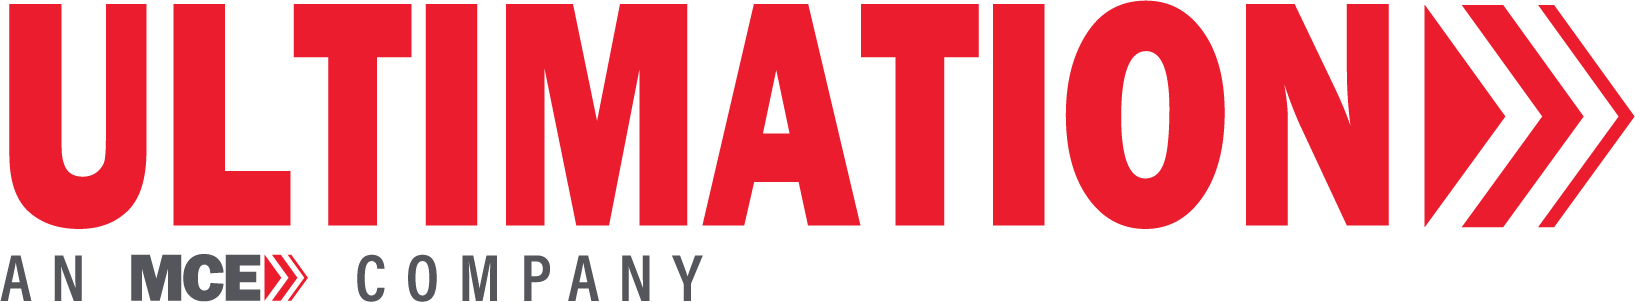 red and black ultimation logo